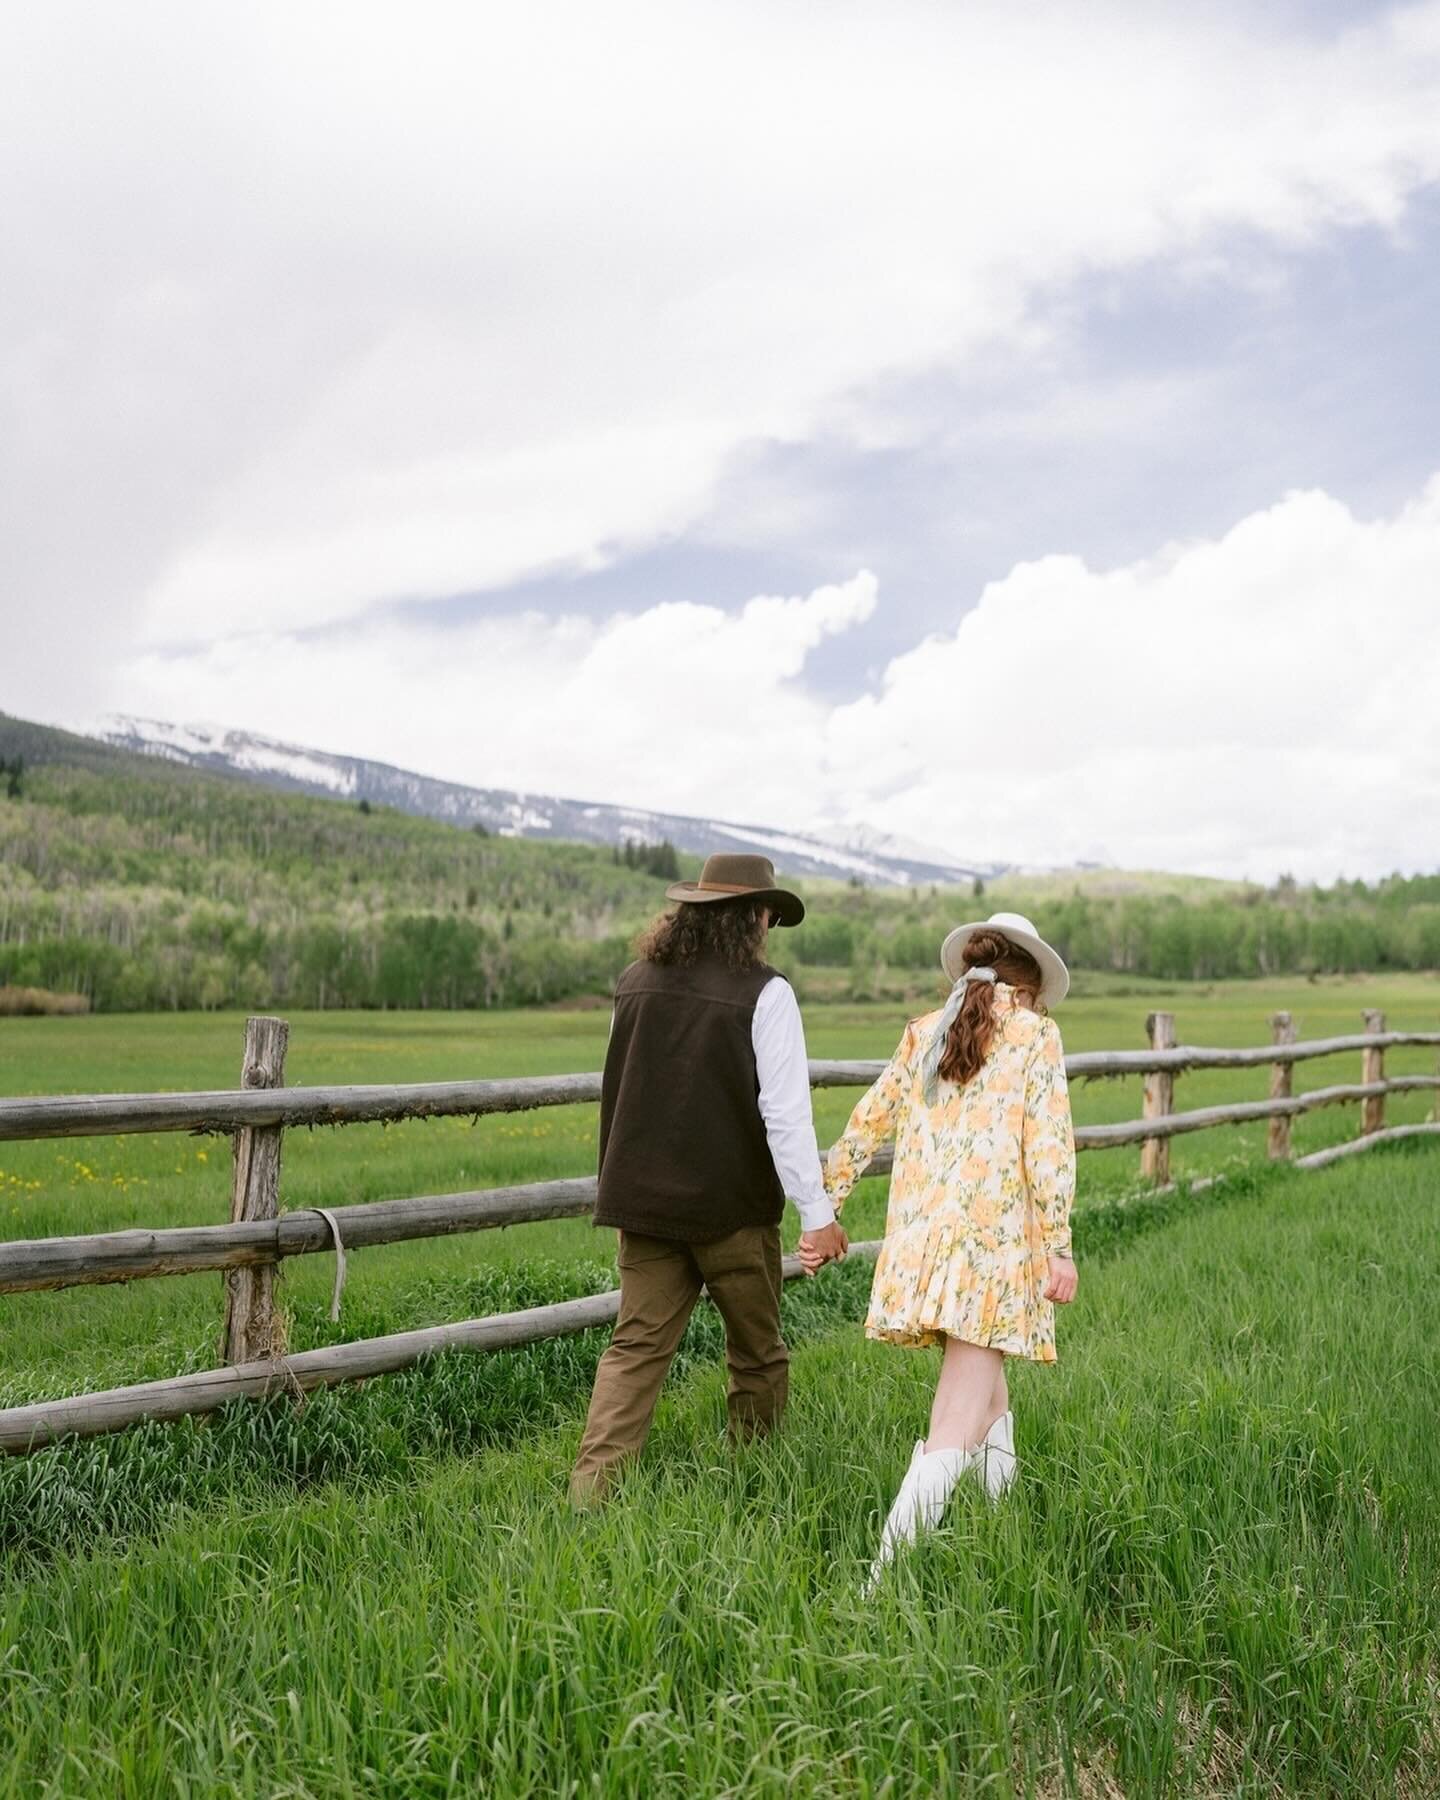 It&rsquo;s the in-between moments.

We walked along this horse farm in Aspen together,  took in the view, gave treats, and laughed. Taking the time to prioritize pre-wedding photos makes a world of difference.

Our time is typically less constrained 